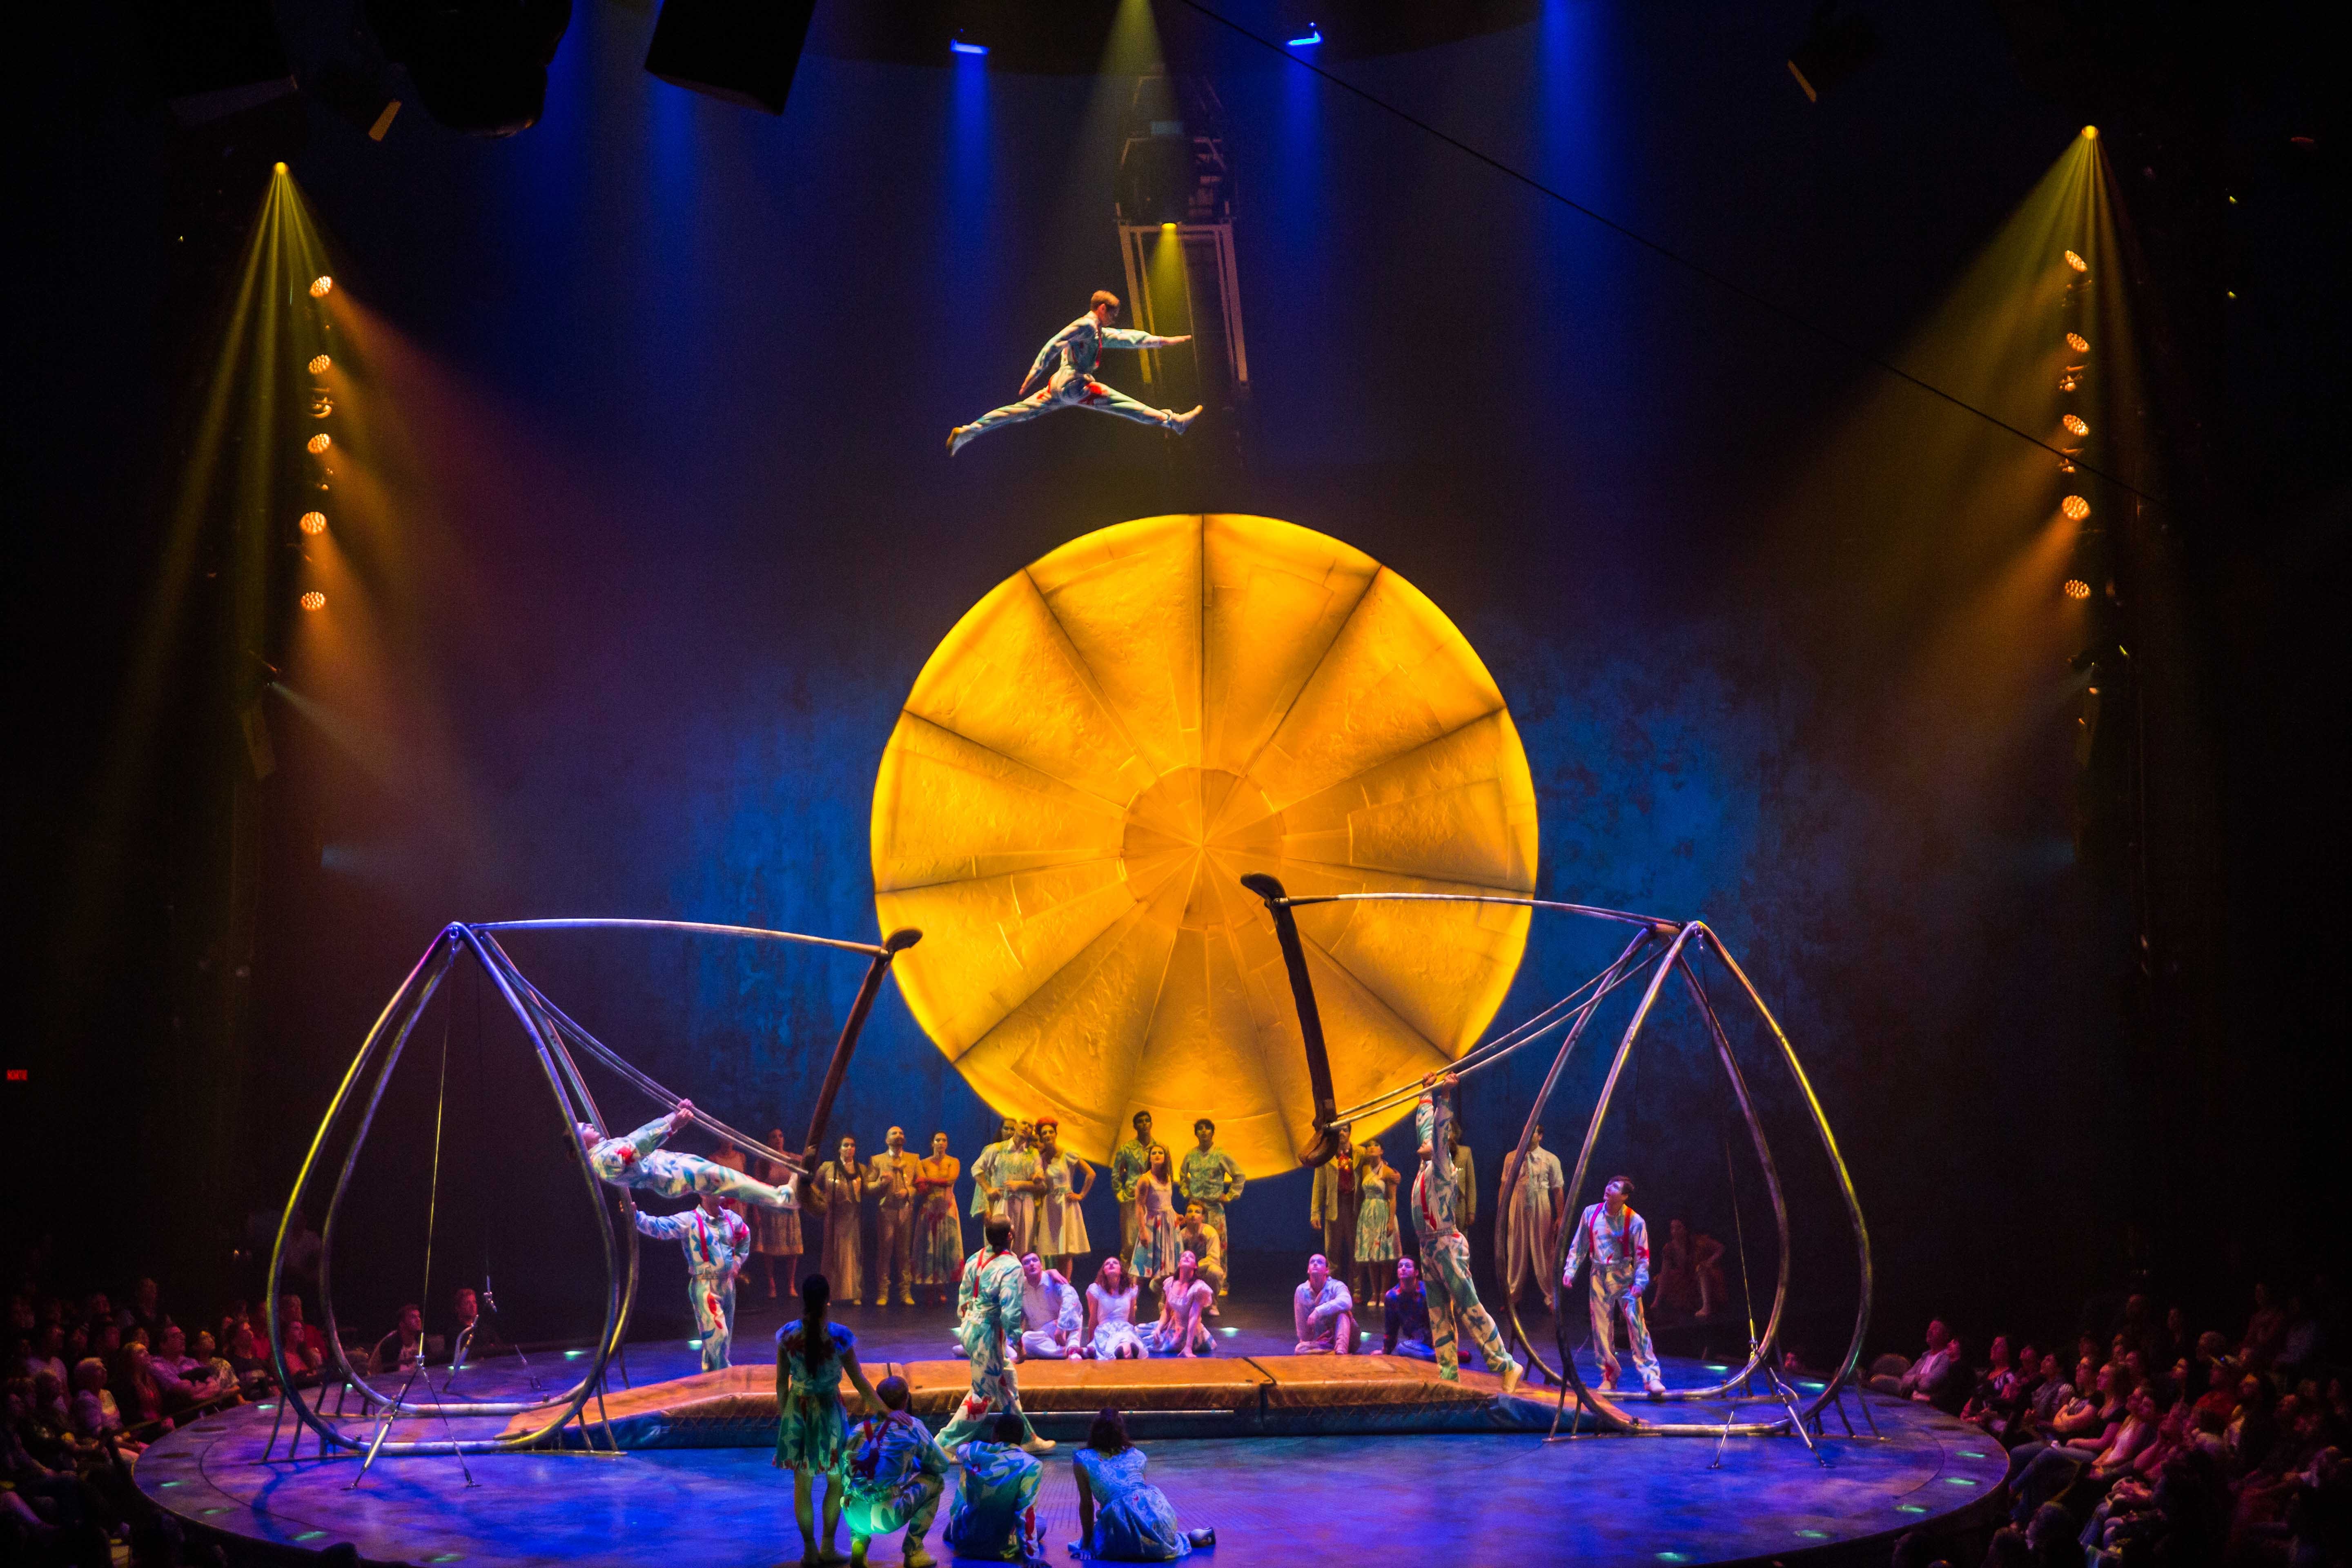 Review: Part circus, part technology trade show, Cirque du Soleil's  Mexico-themed 'Luzia' opens in L.A. - Los Angeles Times